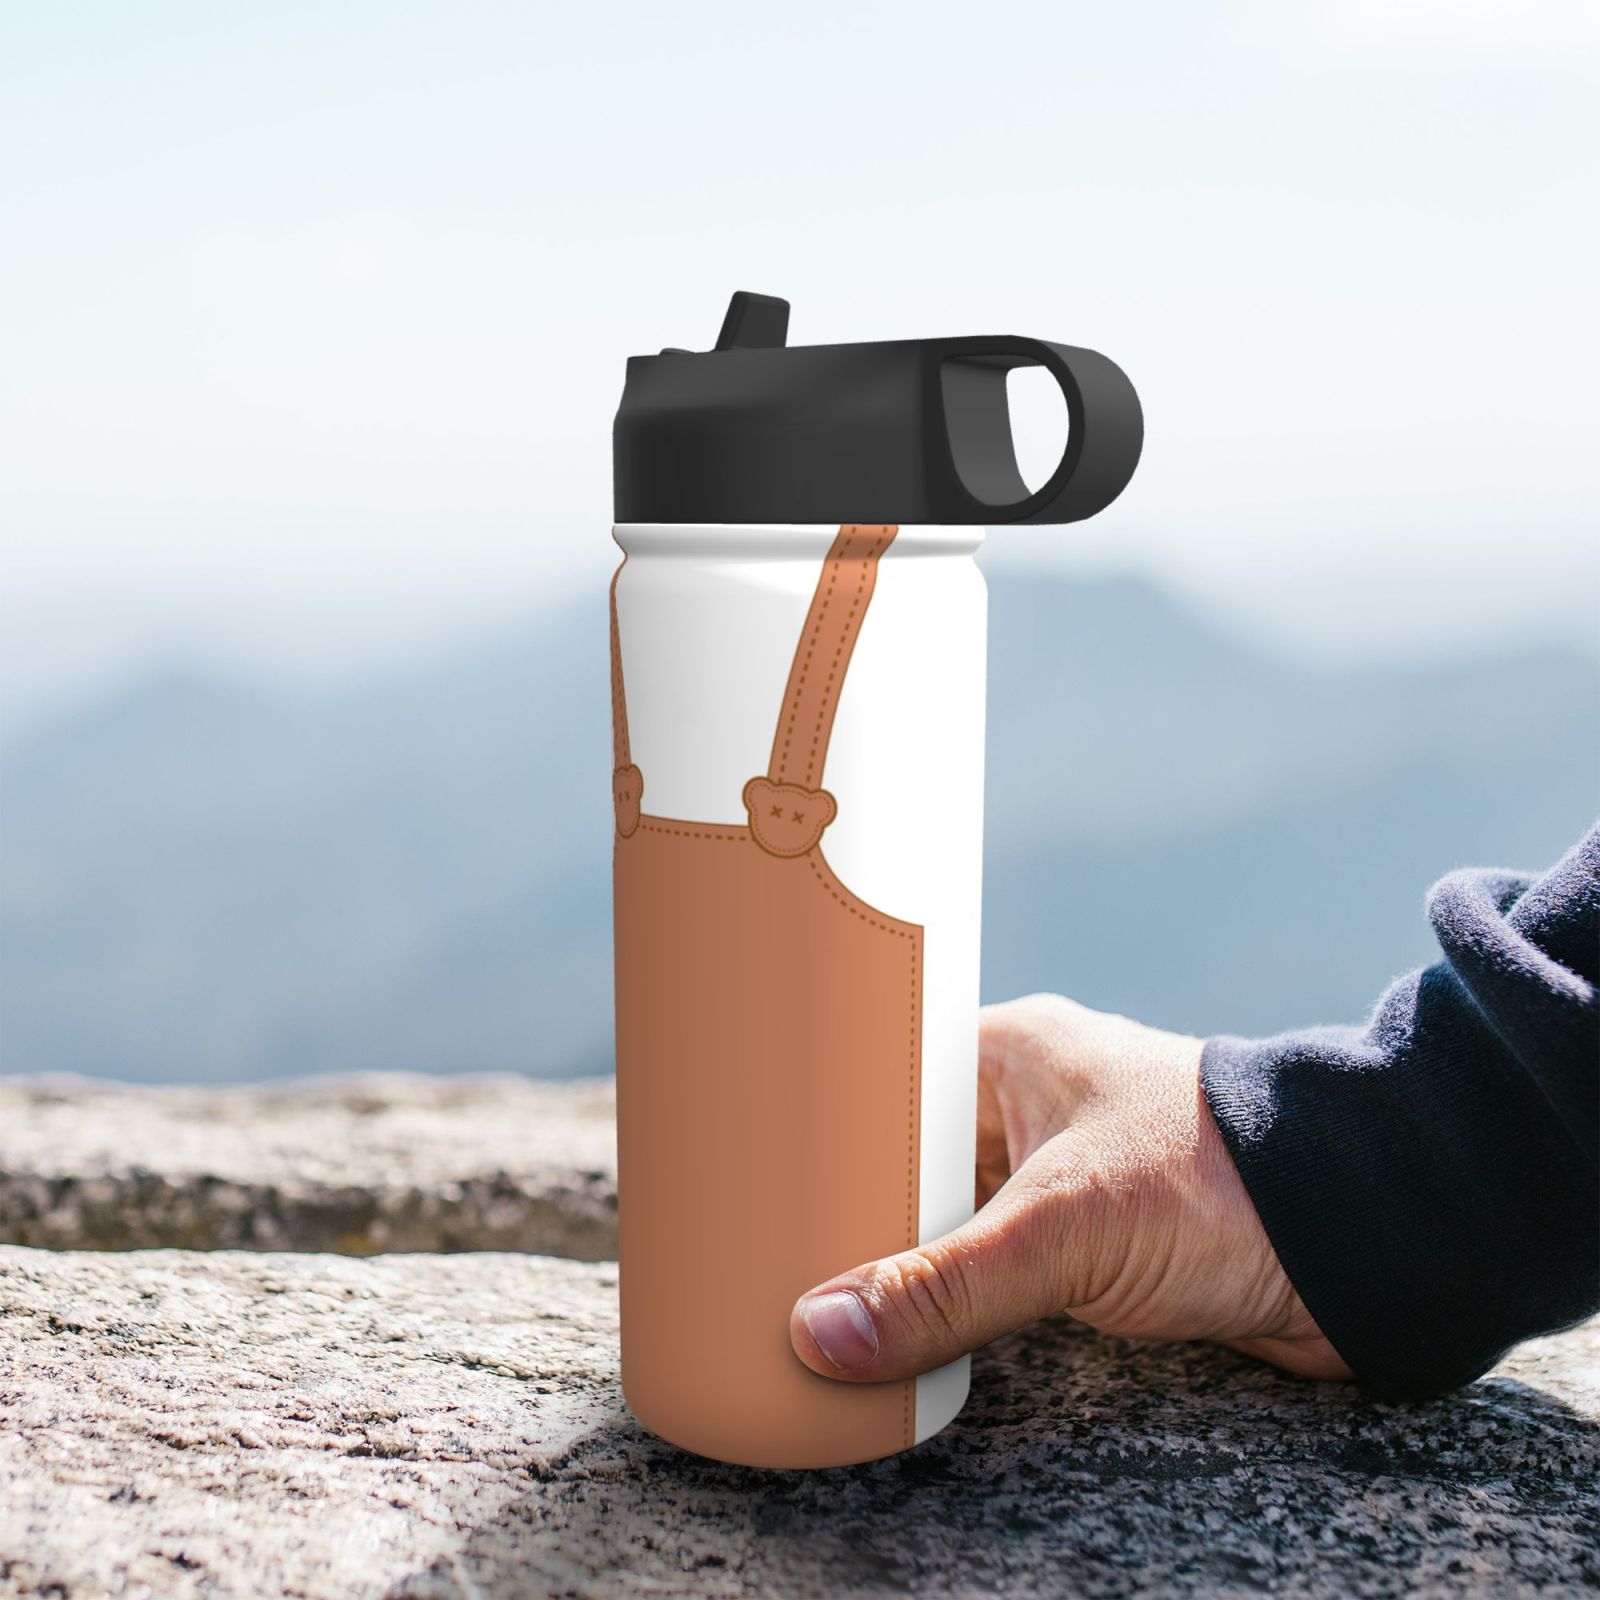 18OZ Sports Insulated Kettle